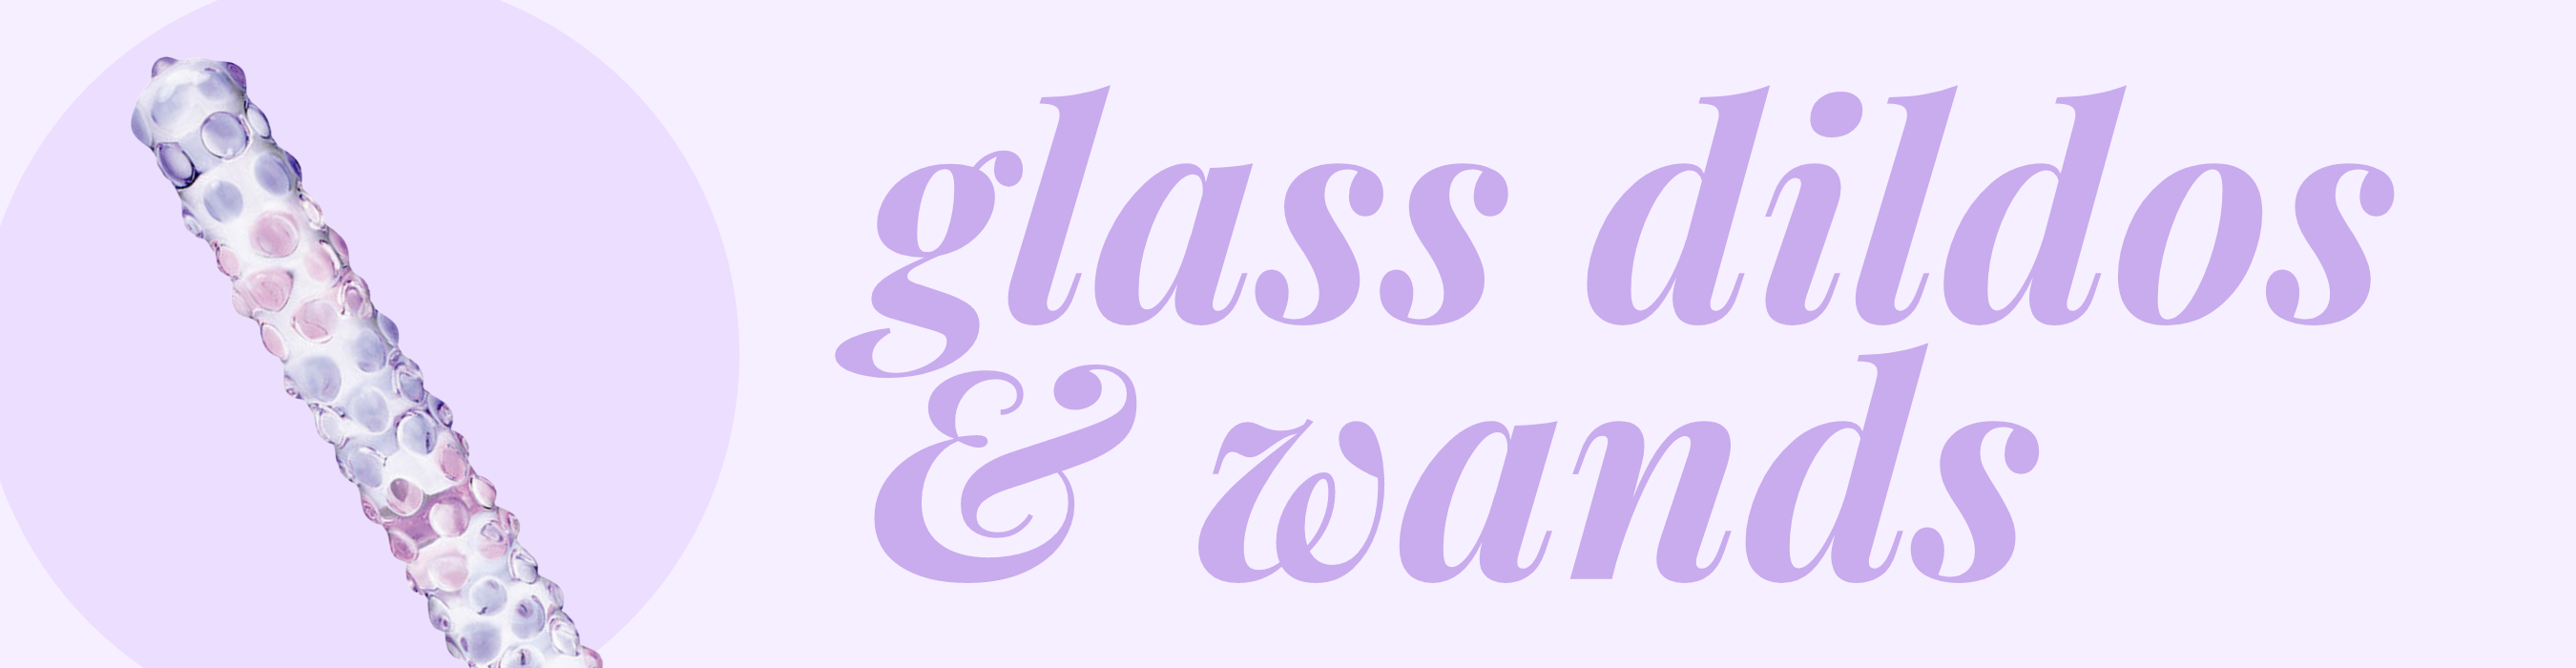 Shop our selection of glass dildos and wands